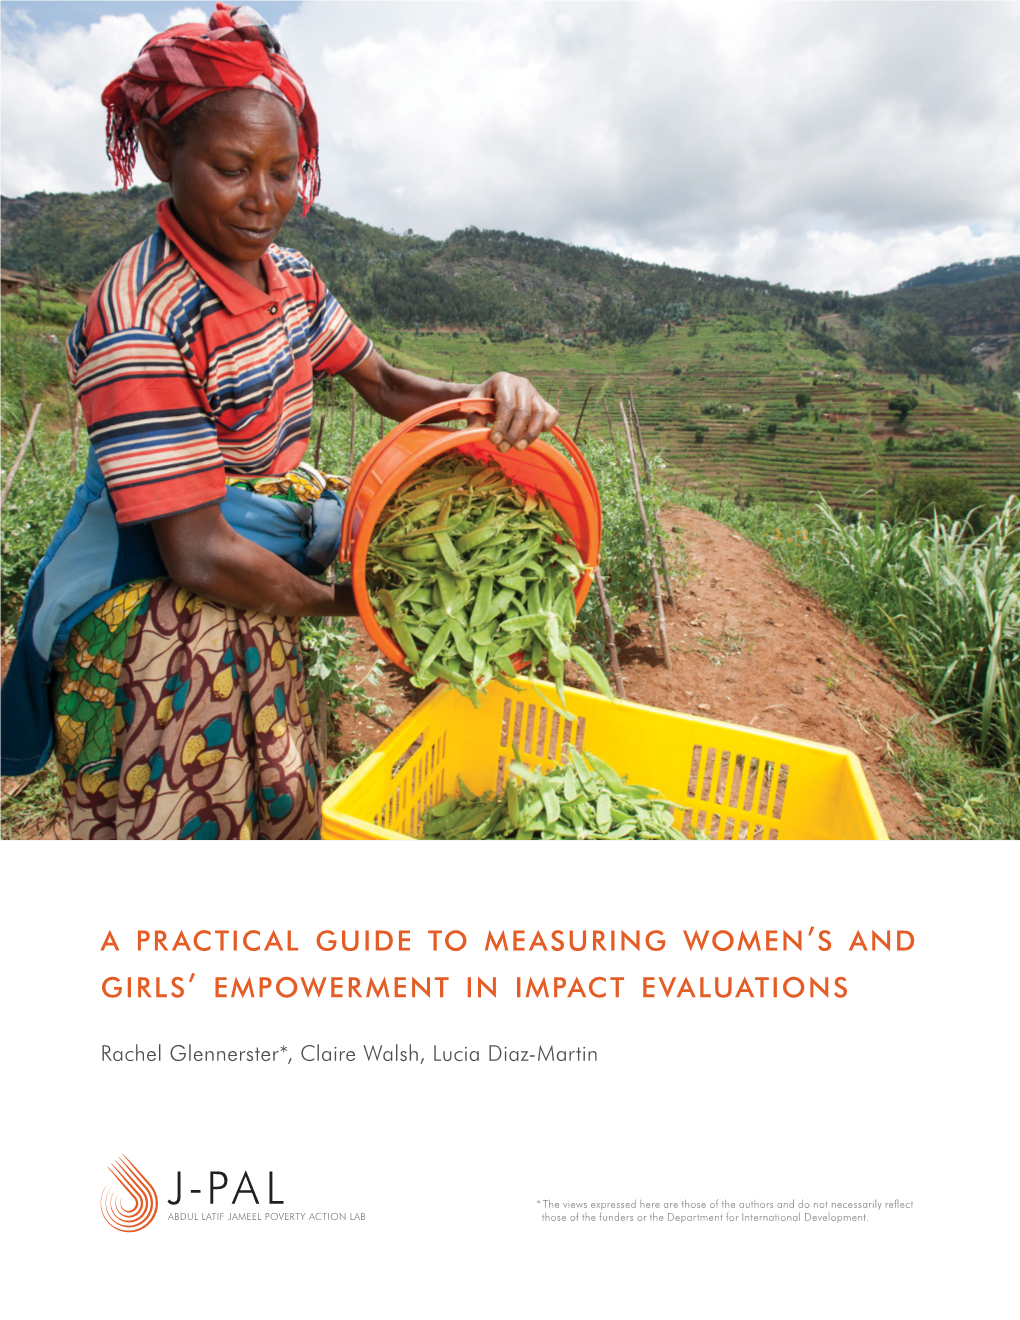 A Practical Guide to Measuring Women's and Girls' Empowerment